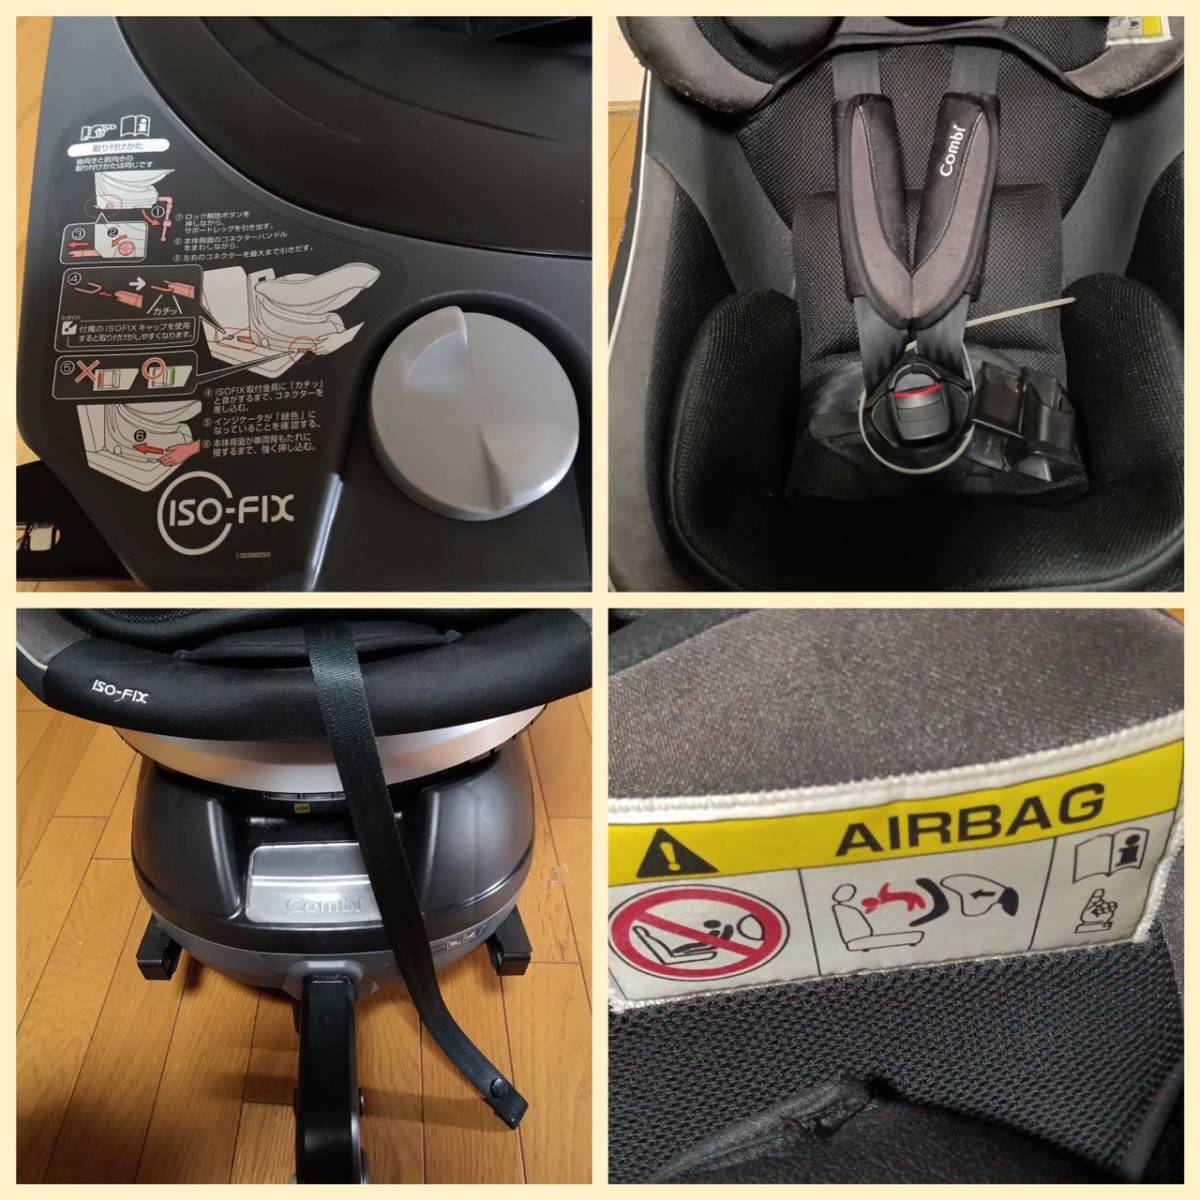  beautiful goods * combination * ISOFIX child seat newborn baby ~4 -years old about till air bag correspondence BLACK *Combi * car supplies present condition goods 